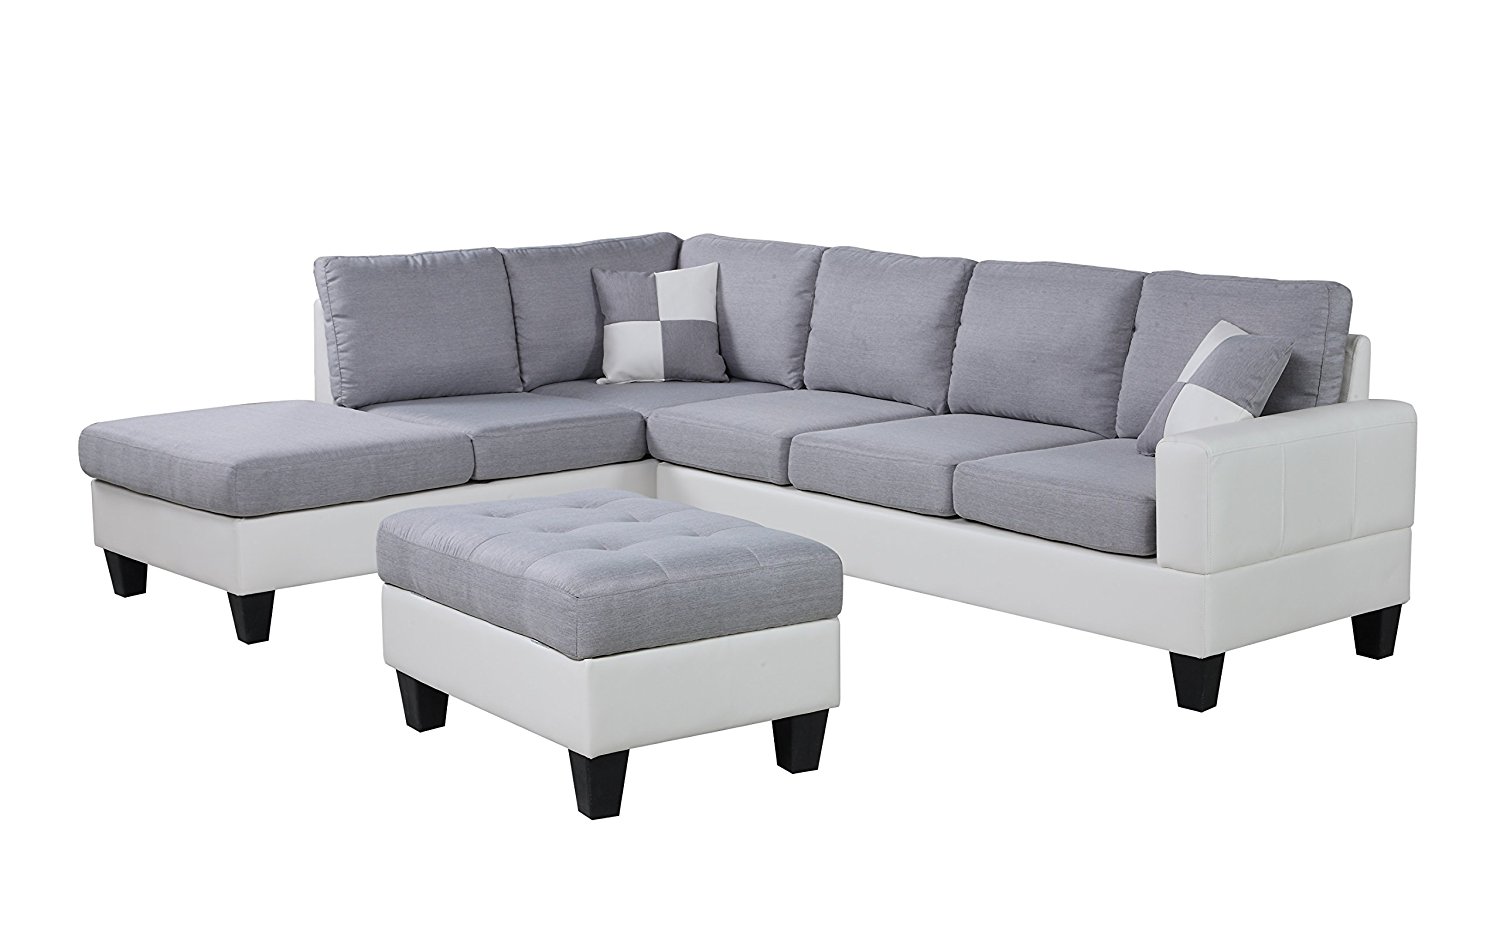 Classic Two Tone Large Linen Fabric and Bonded Leather Living Room Sectional Sofa (White / Light Grey)